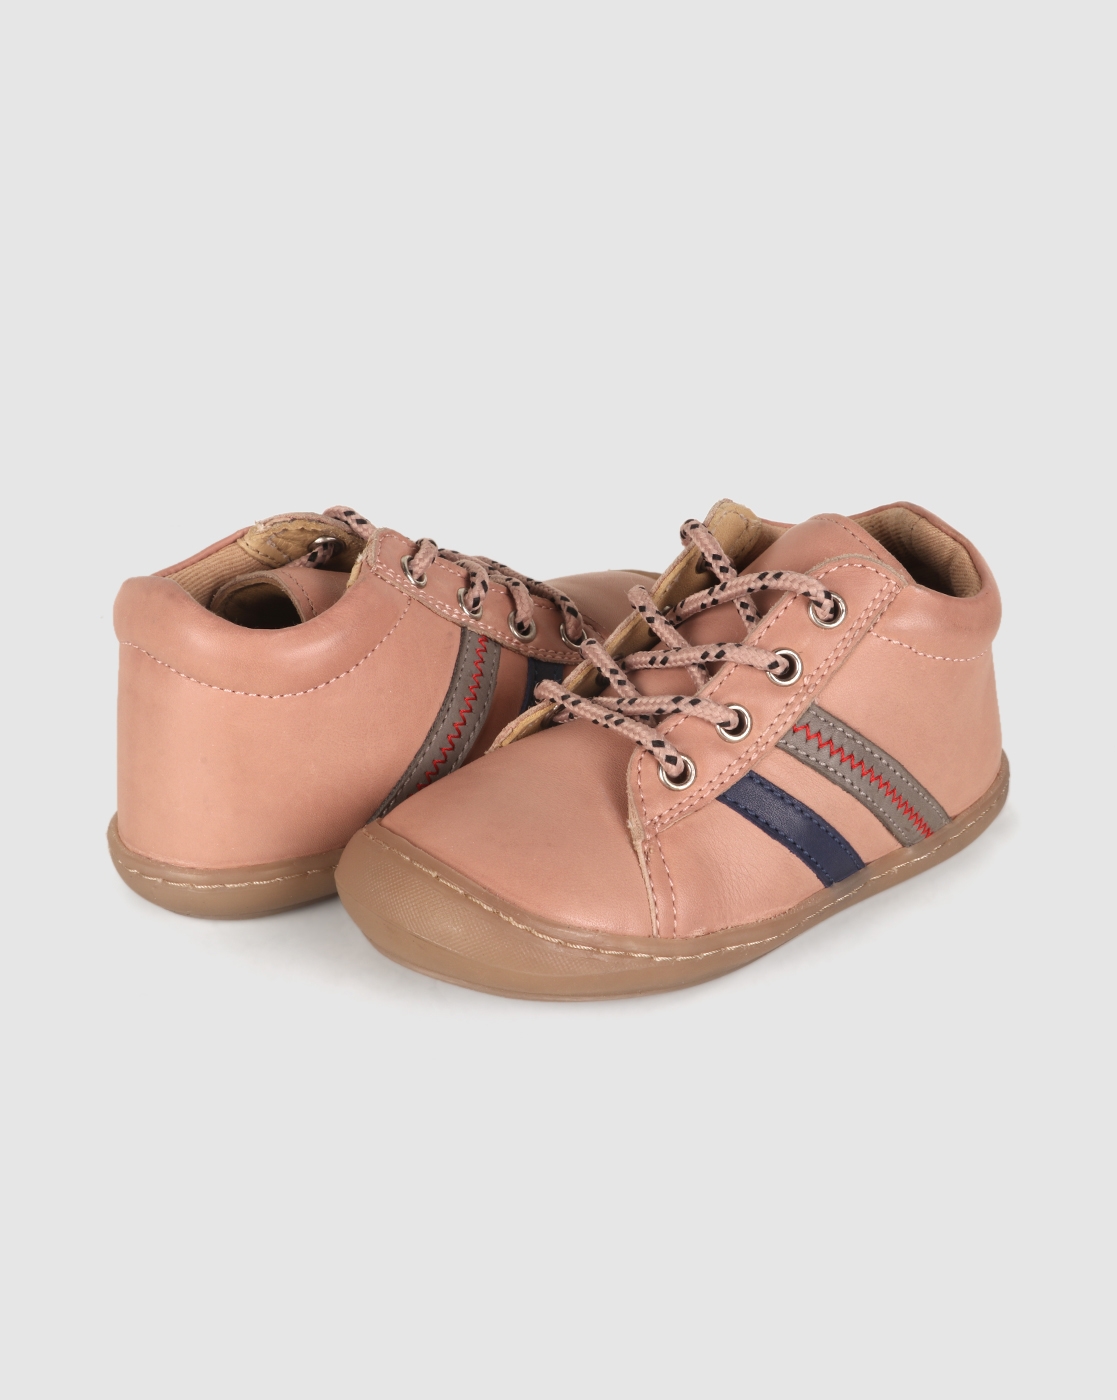 Boys First Walker Shoes - Pink